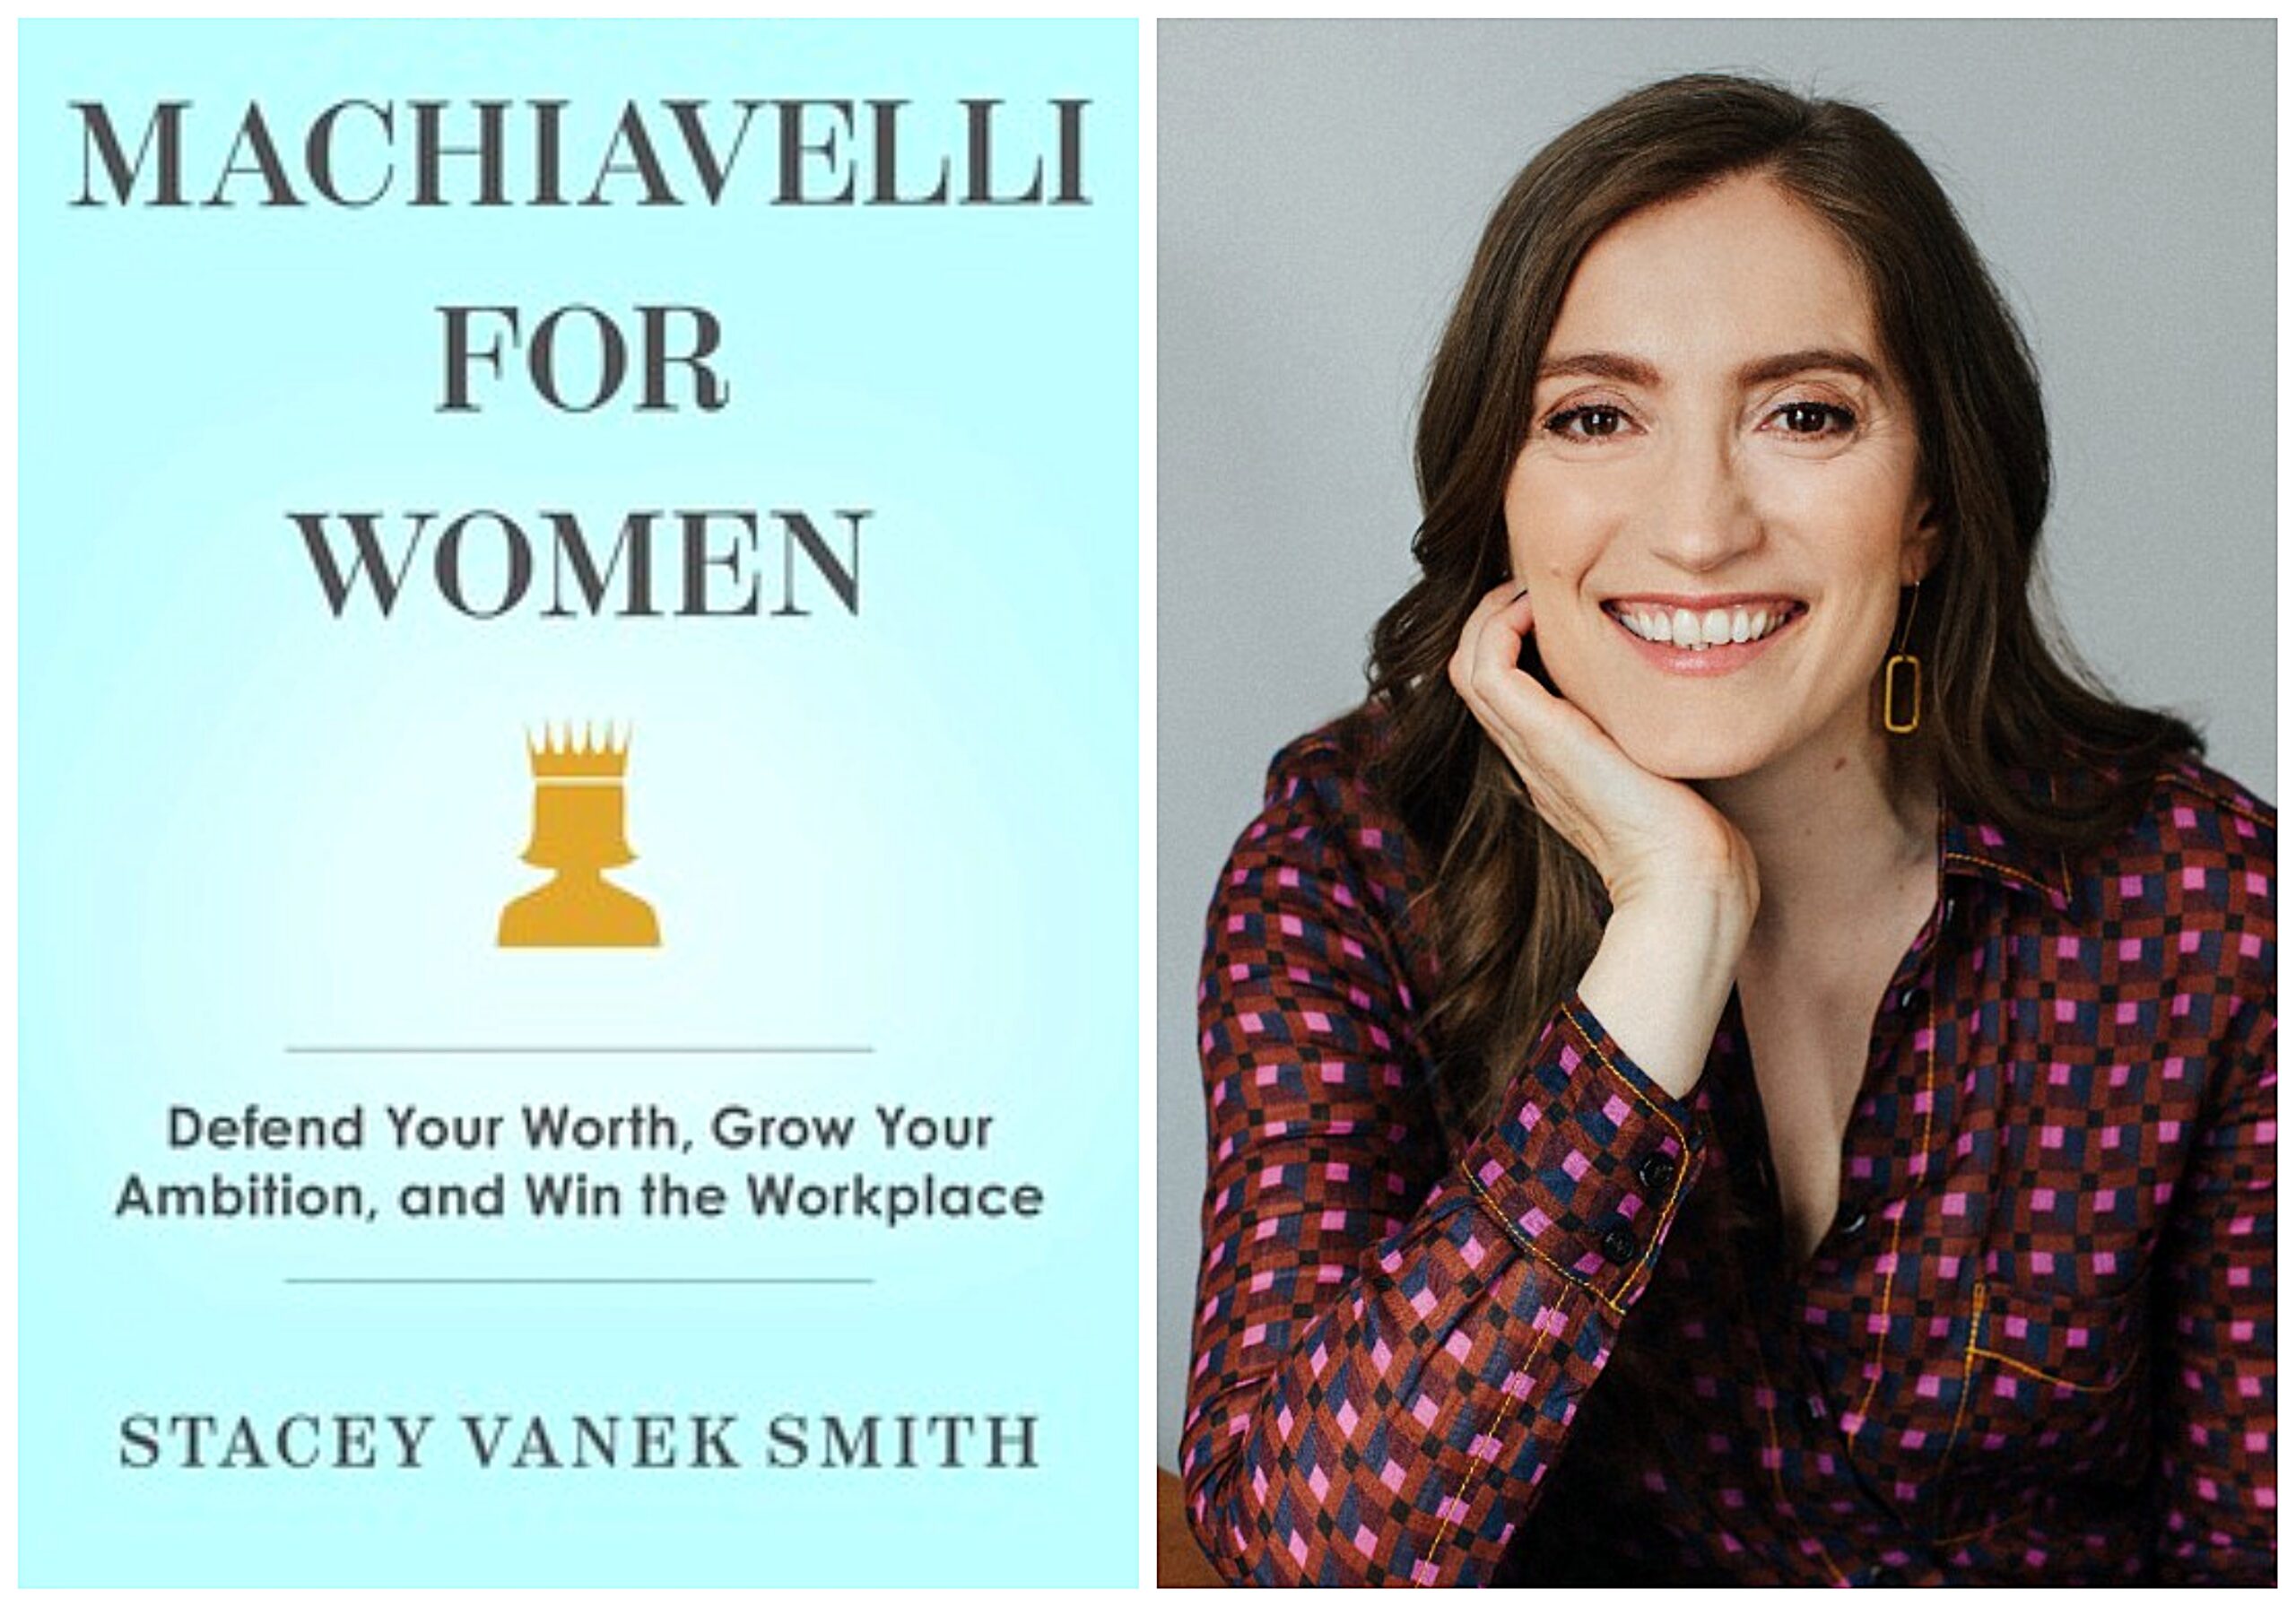 NPR co-host of the show The Indicator from Planet Money with the cover of her new book "Machiavelli for Women."